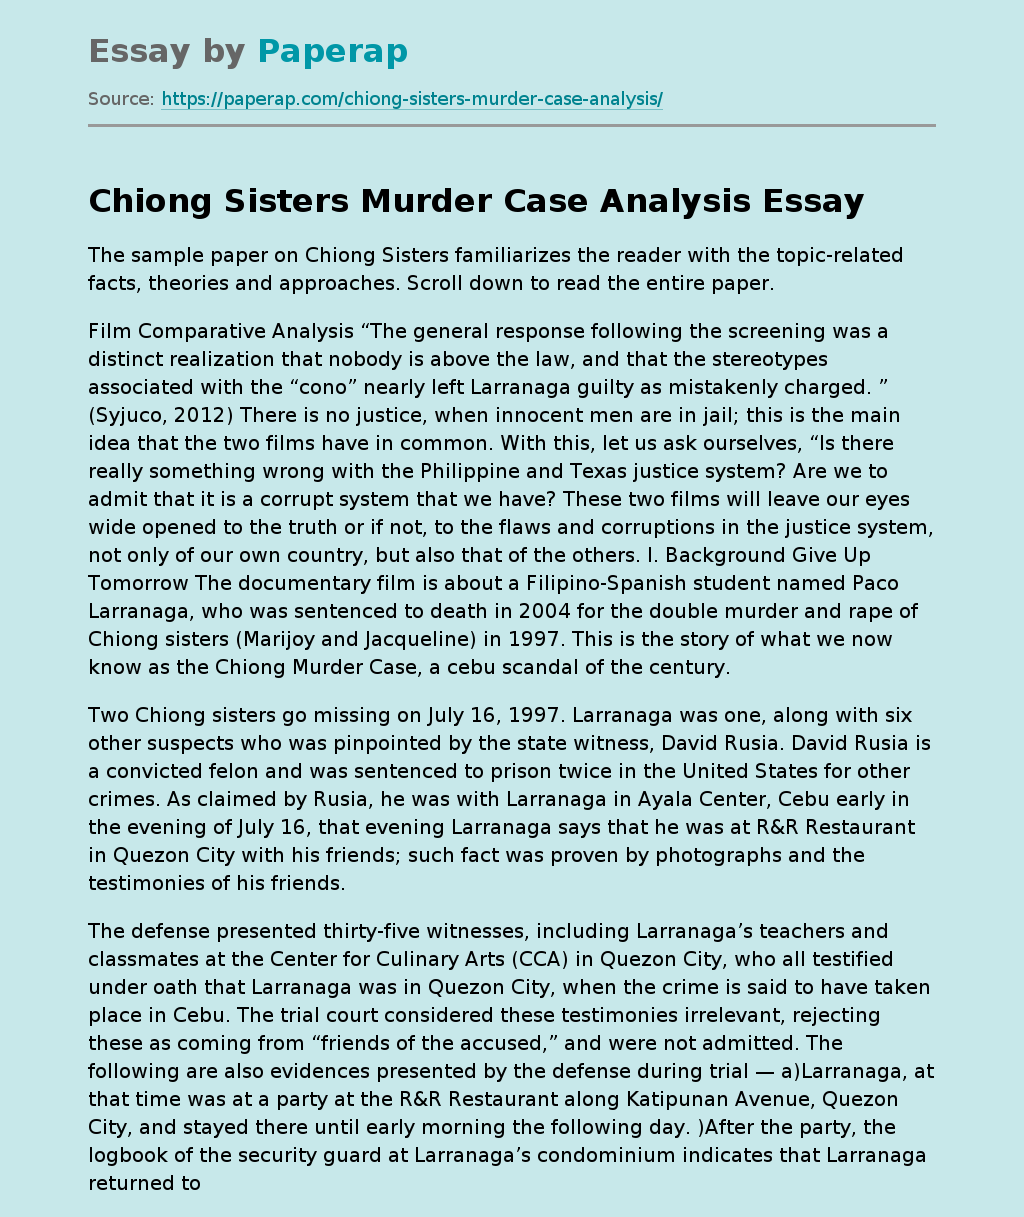 Chiong Sisters Murder Case Analysis